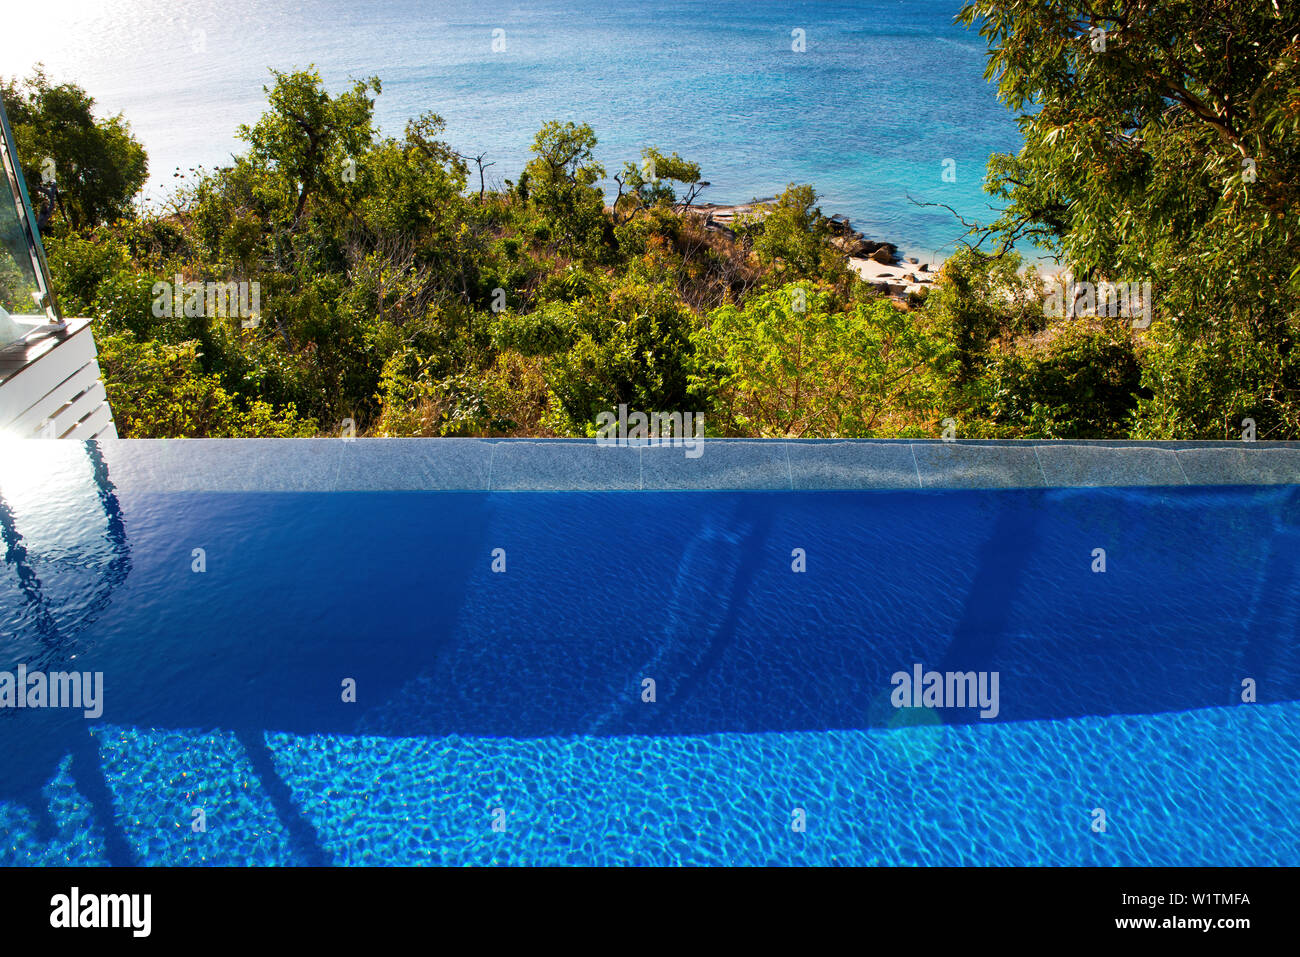 The pool of the Villa at the Lizard Island Resort is high above the ocean Stock Photo